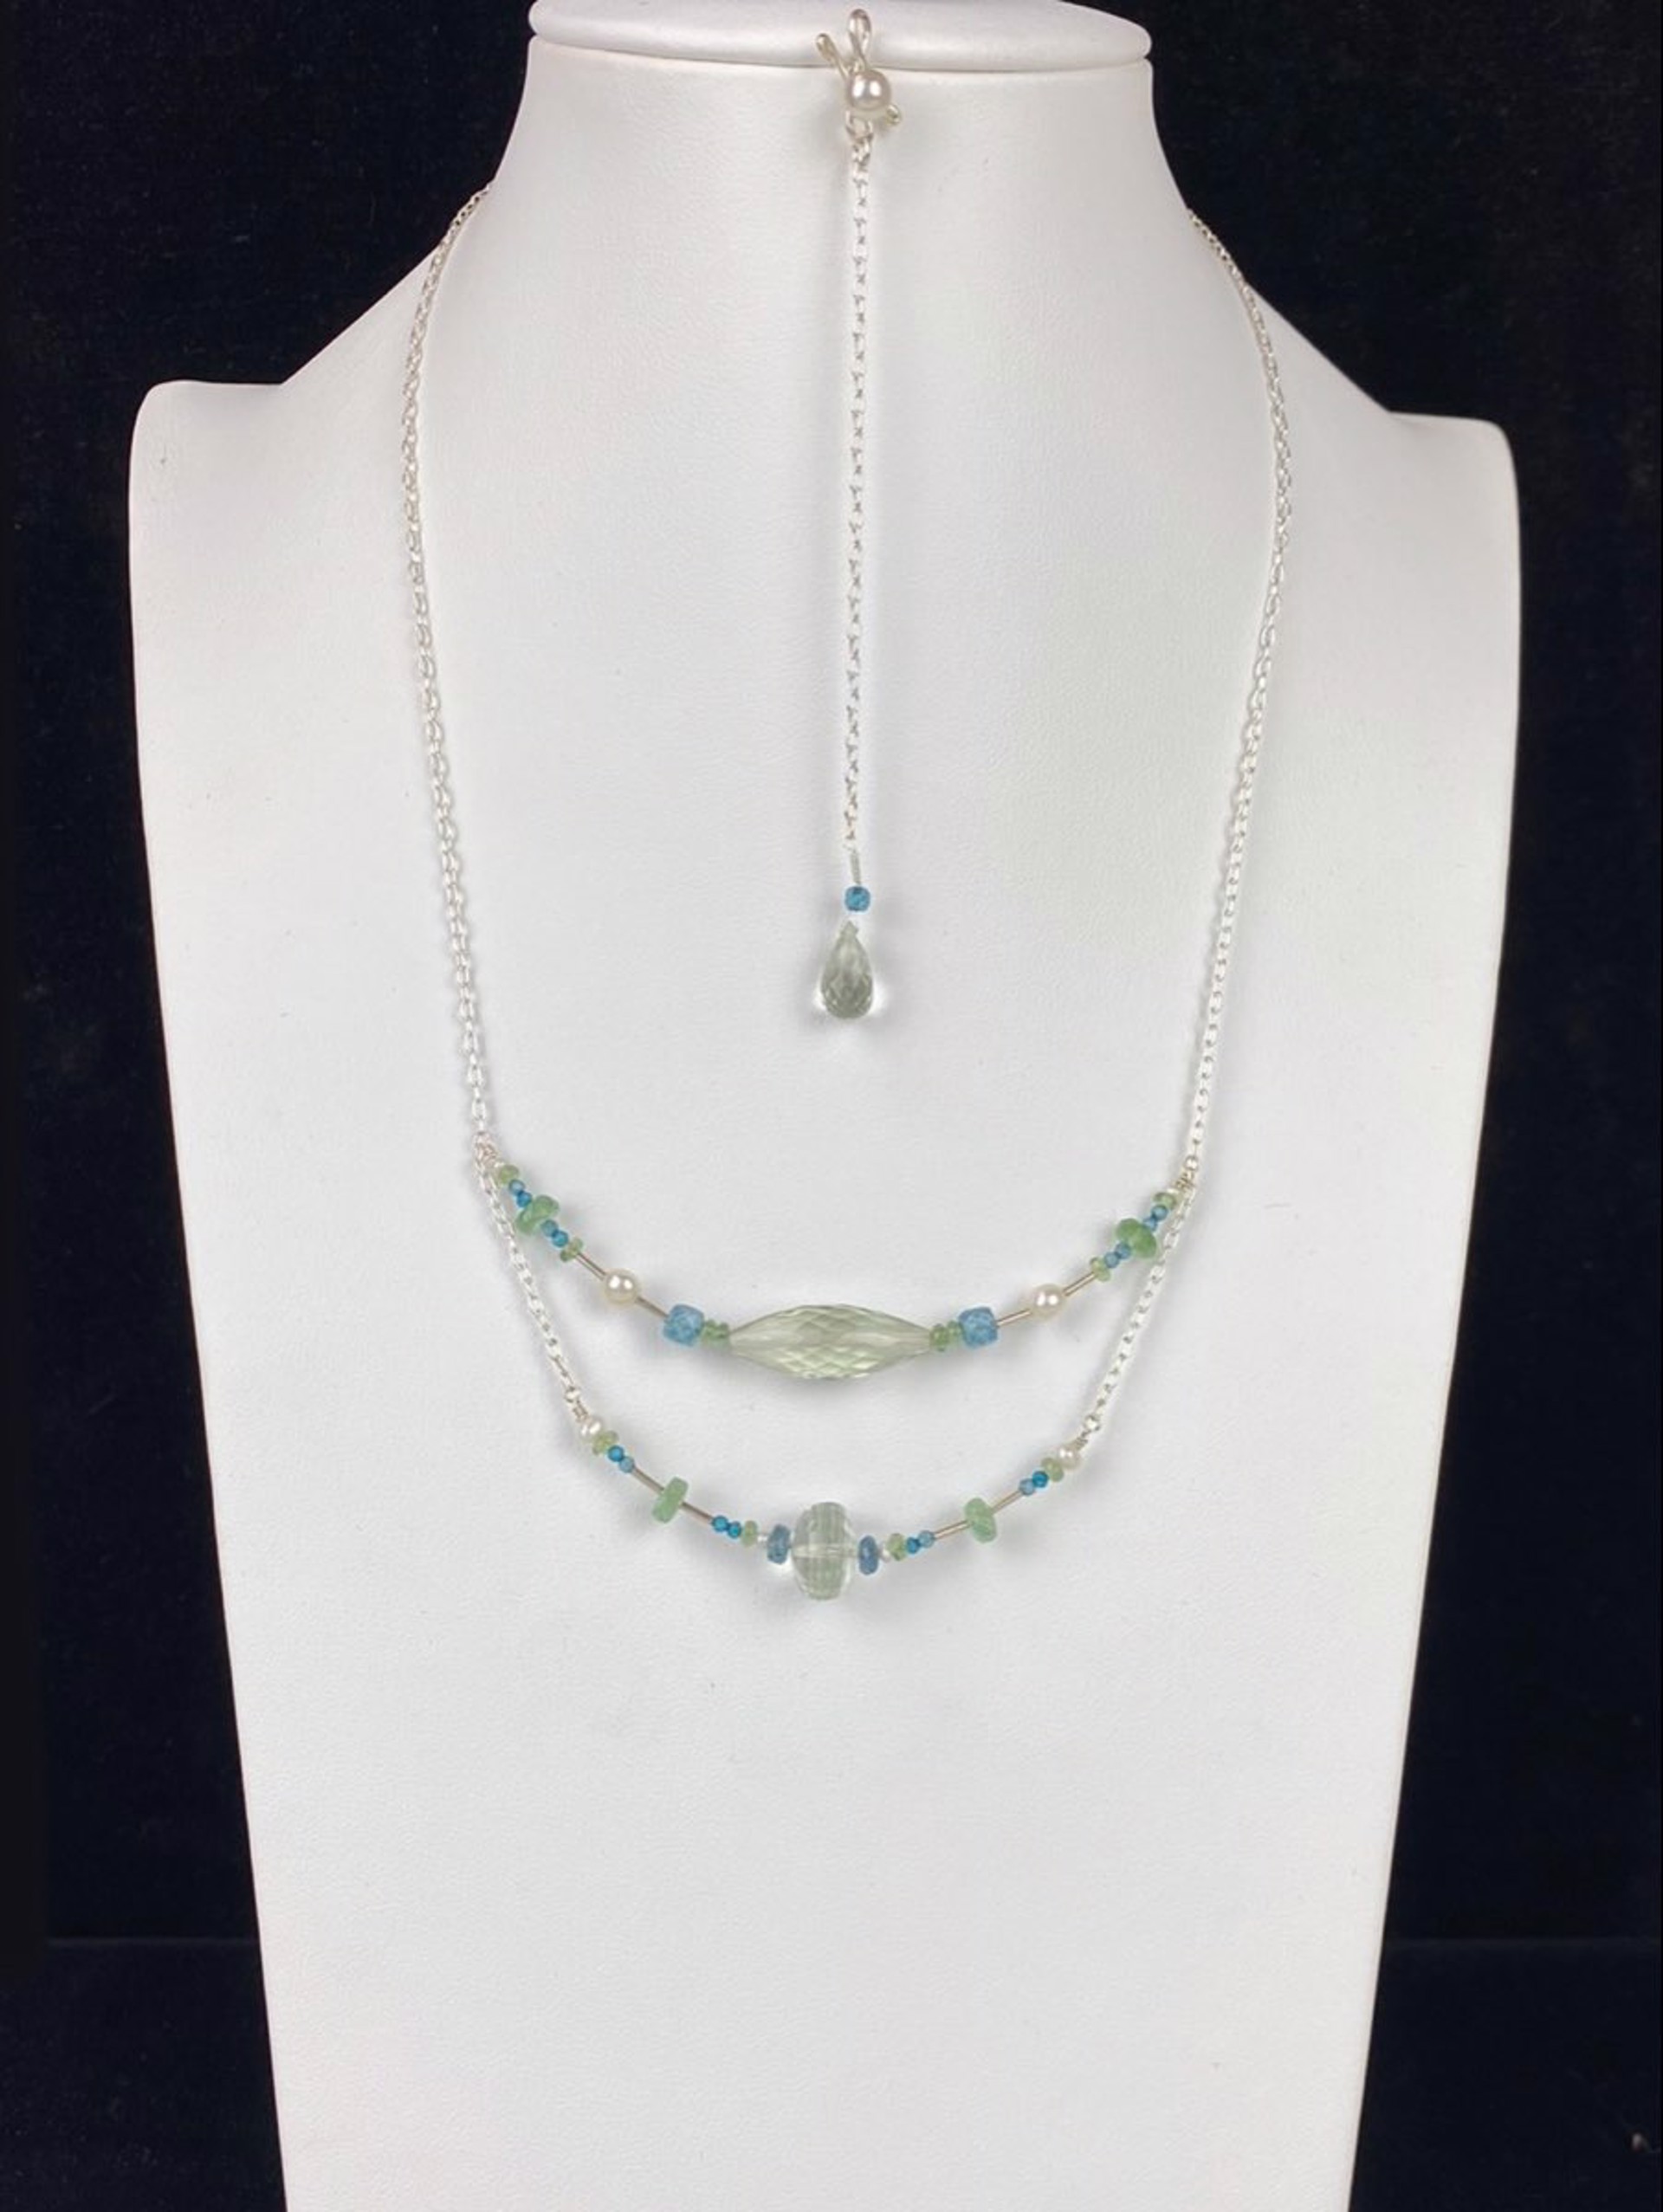 Green Amethyst, Kyanite, London Blue Quartz, Pearls, and Sterling Silver Double Necklace and Infinity Pendant by Lisa Kelley